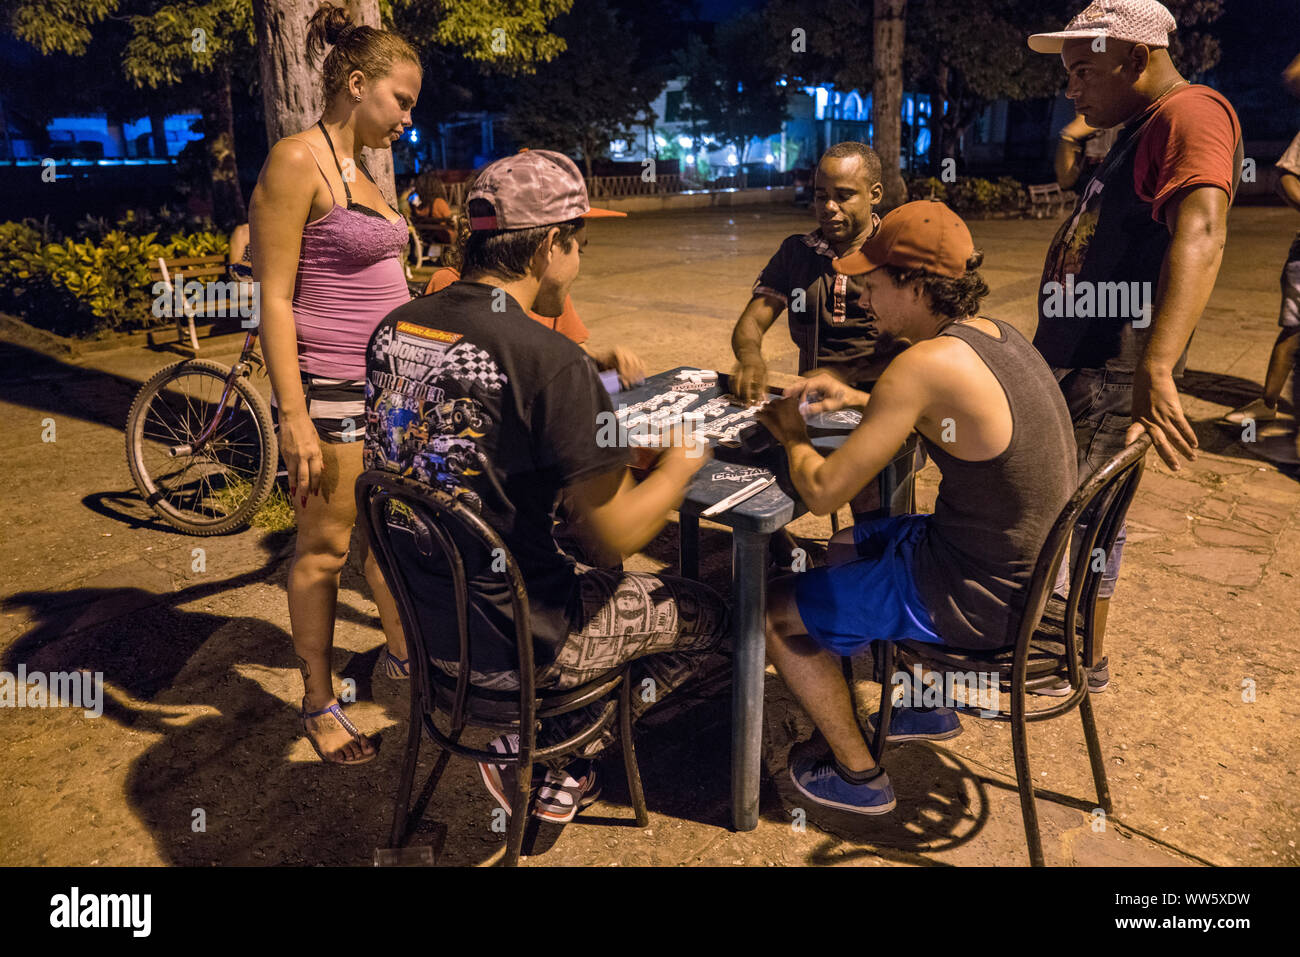 Dominoes player sitting at a lukewarm night on the churchyard square in ViÃ±ales, people watching Stock Photo